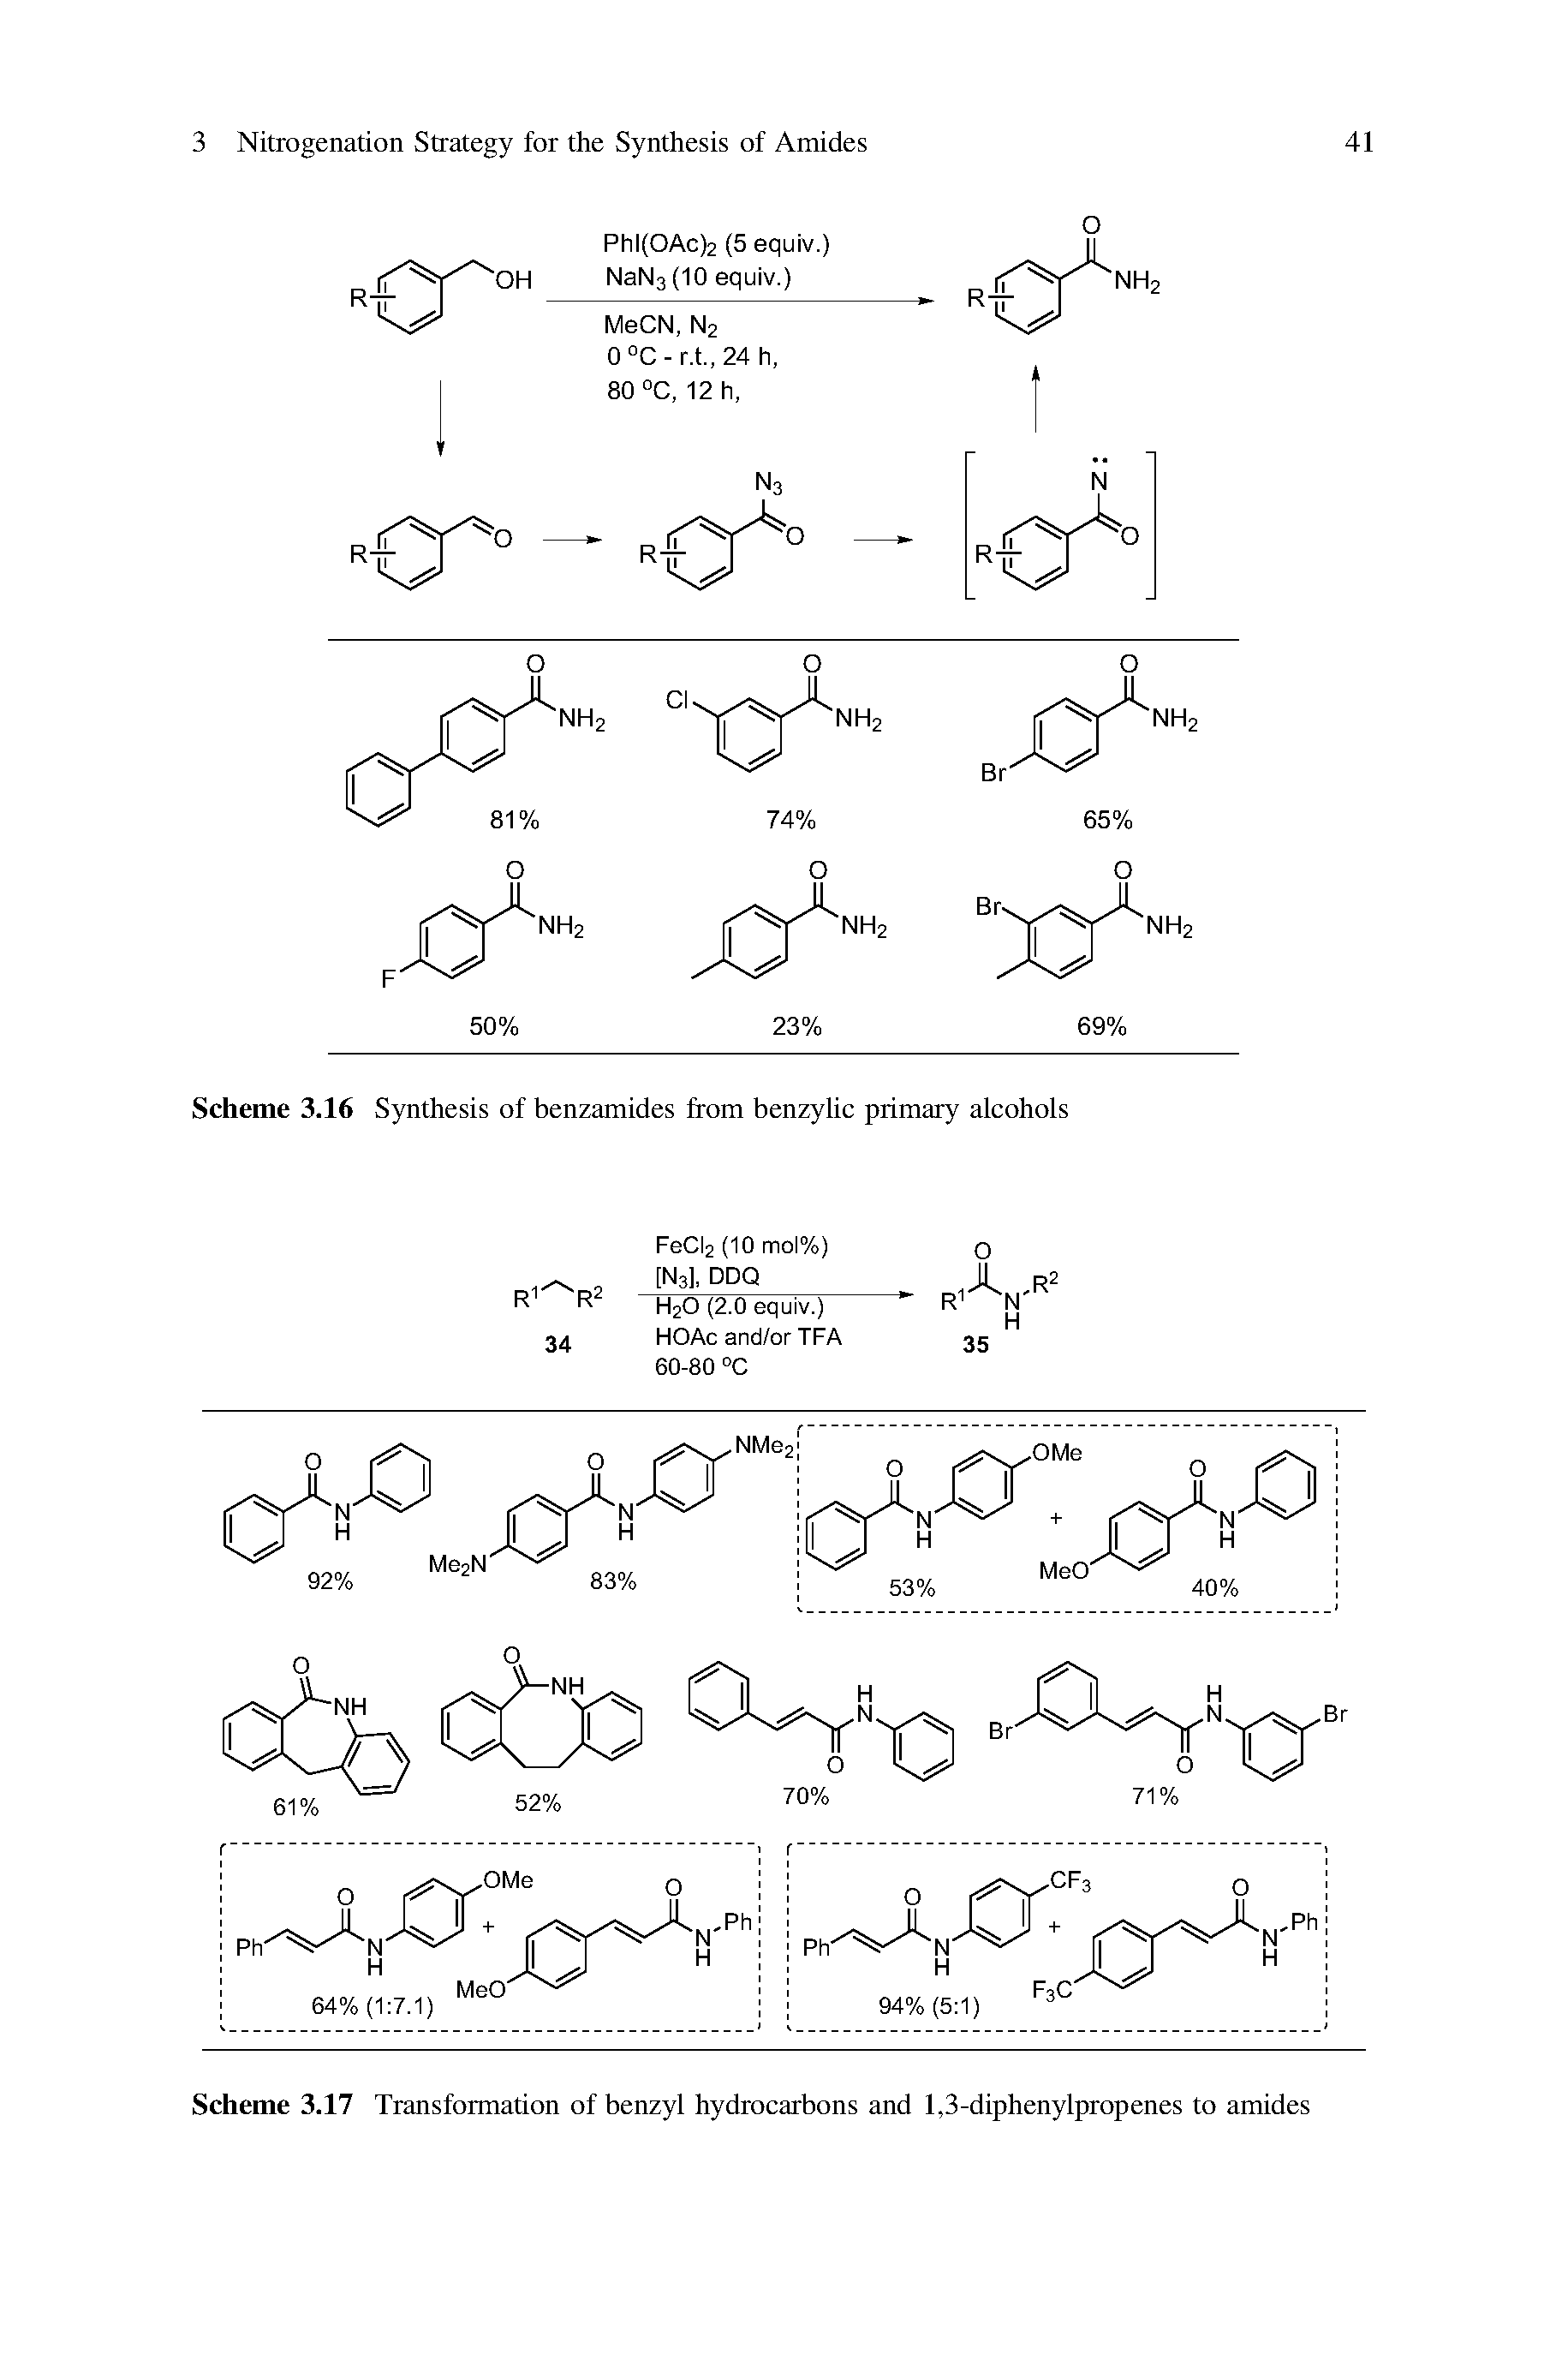 Scheme 3.16 Synthesis of benzamides from benzylic primary alcohols...